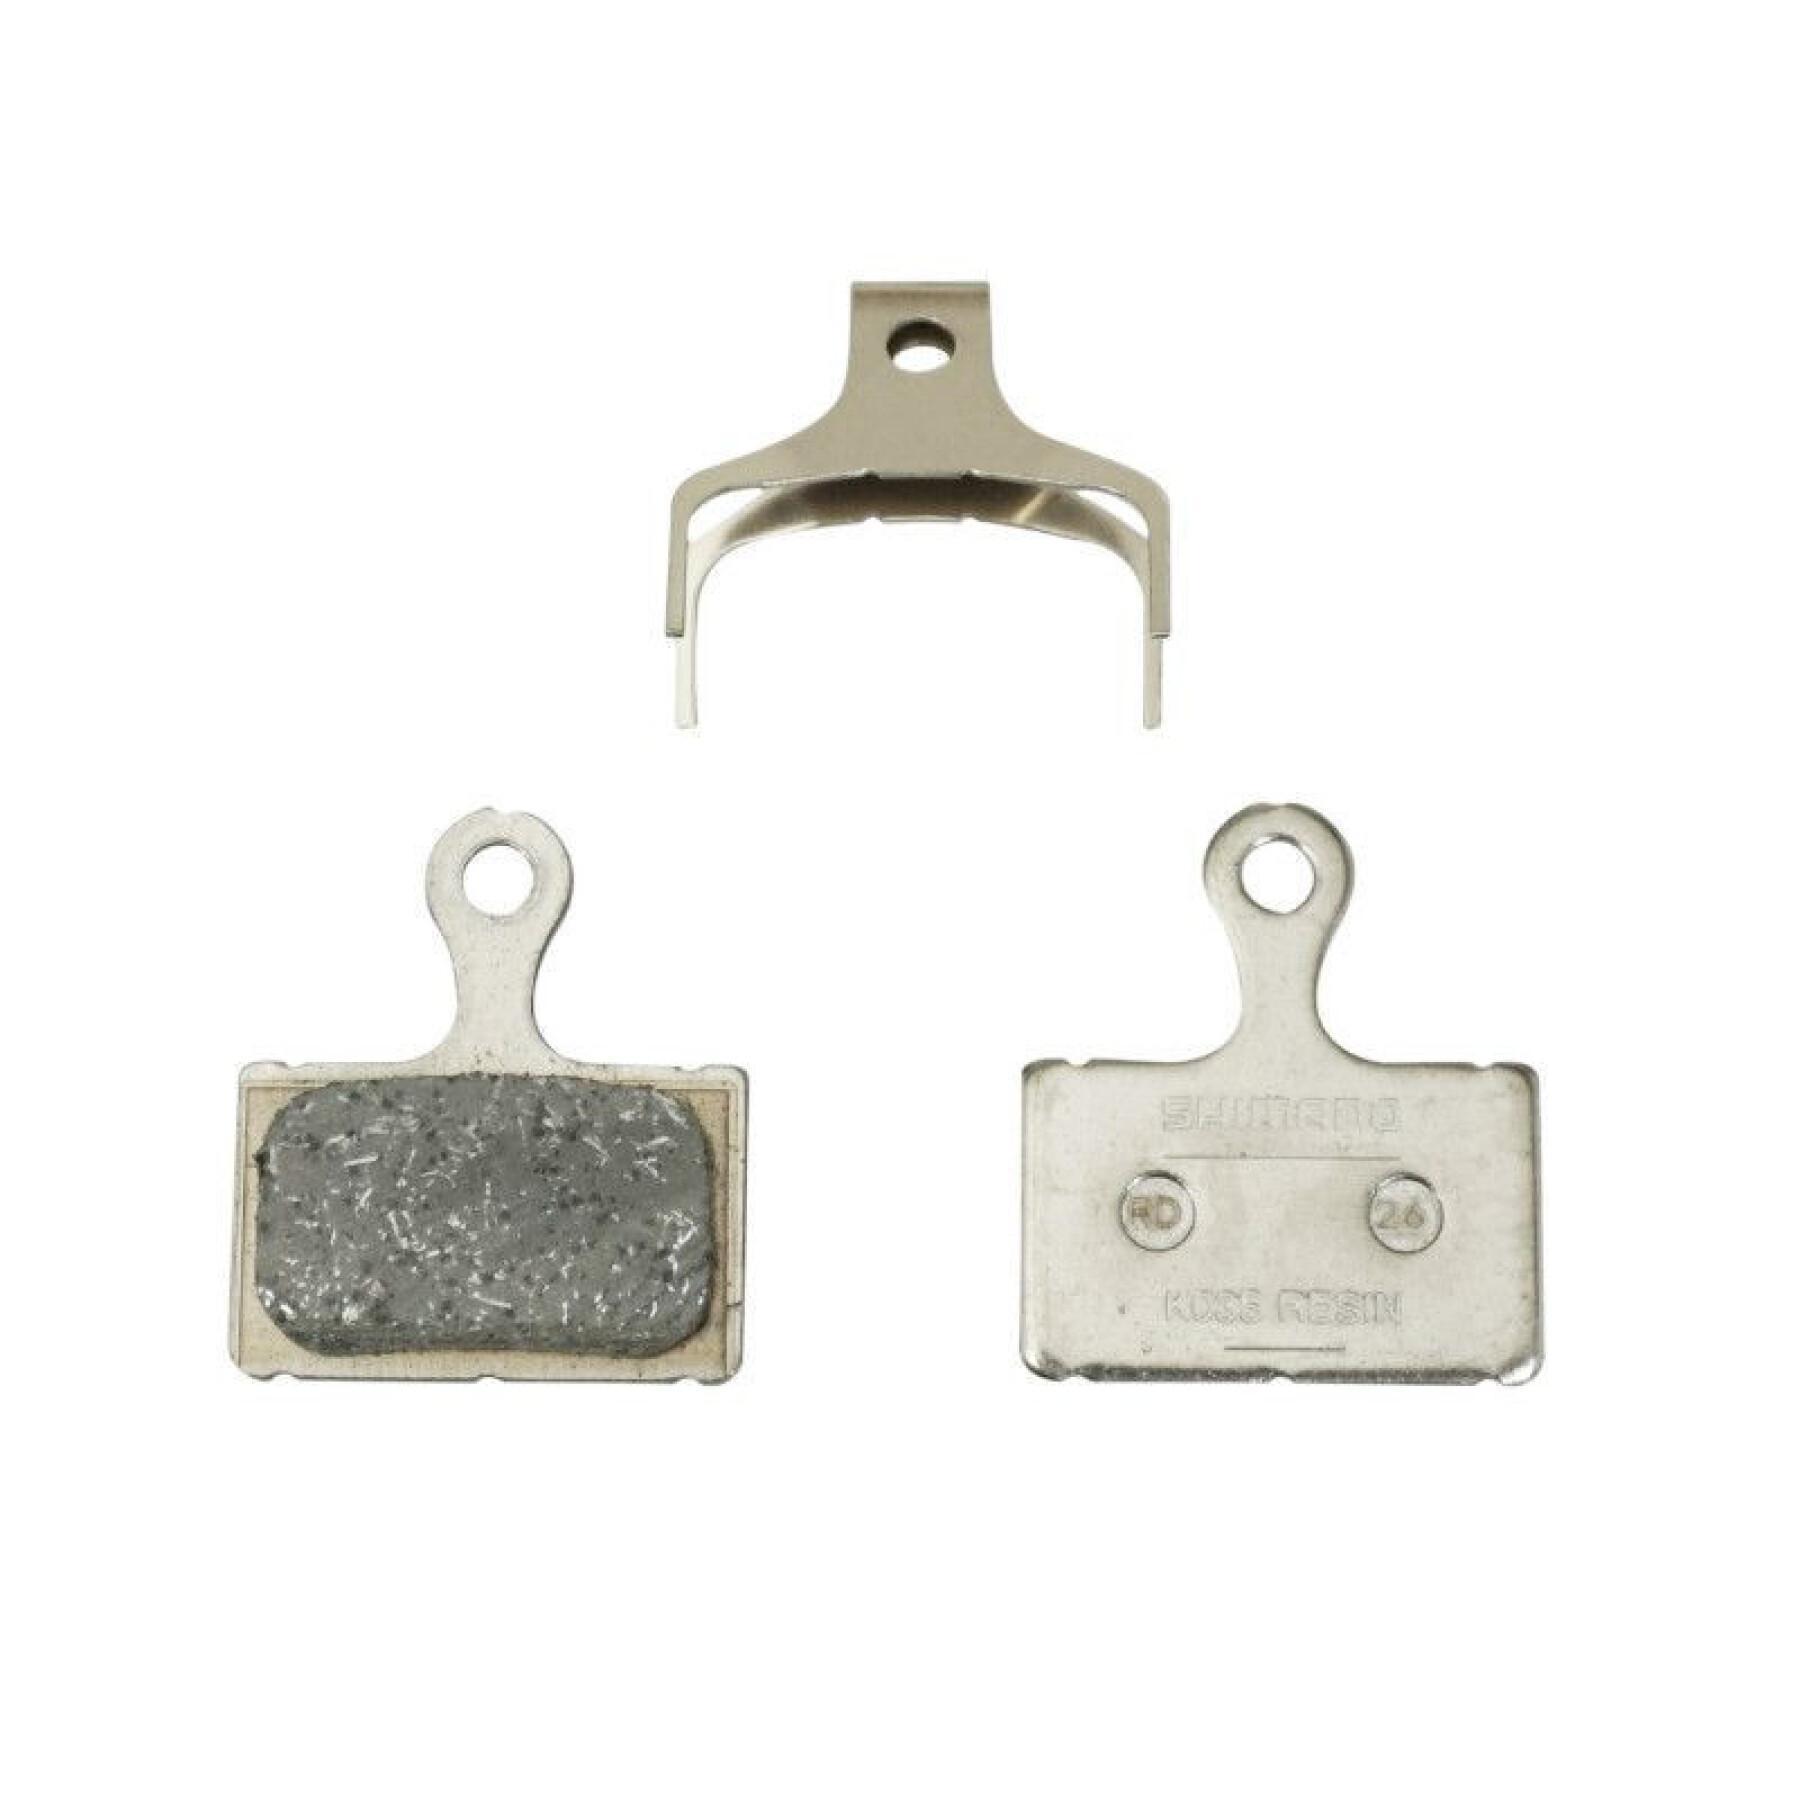 Pair of brake pads for road bikes-gravel- mountain bikes Shimano Shimano Xtr M9100 - Dura-Ace R9170 - Ultegra R8070 -105 R7070 - Tiagra R4770, Rs and Rx Resin range (Shimano) -K05S - Formerly K03S